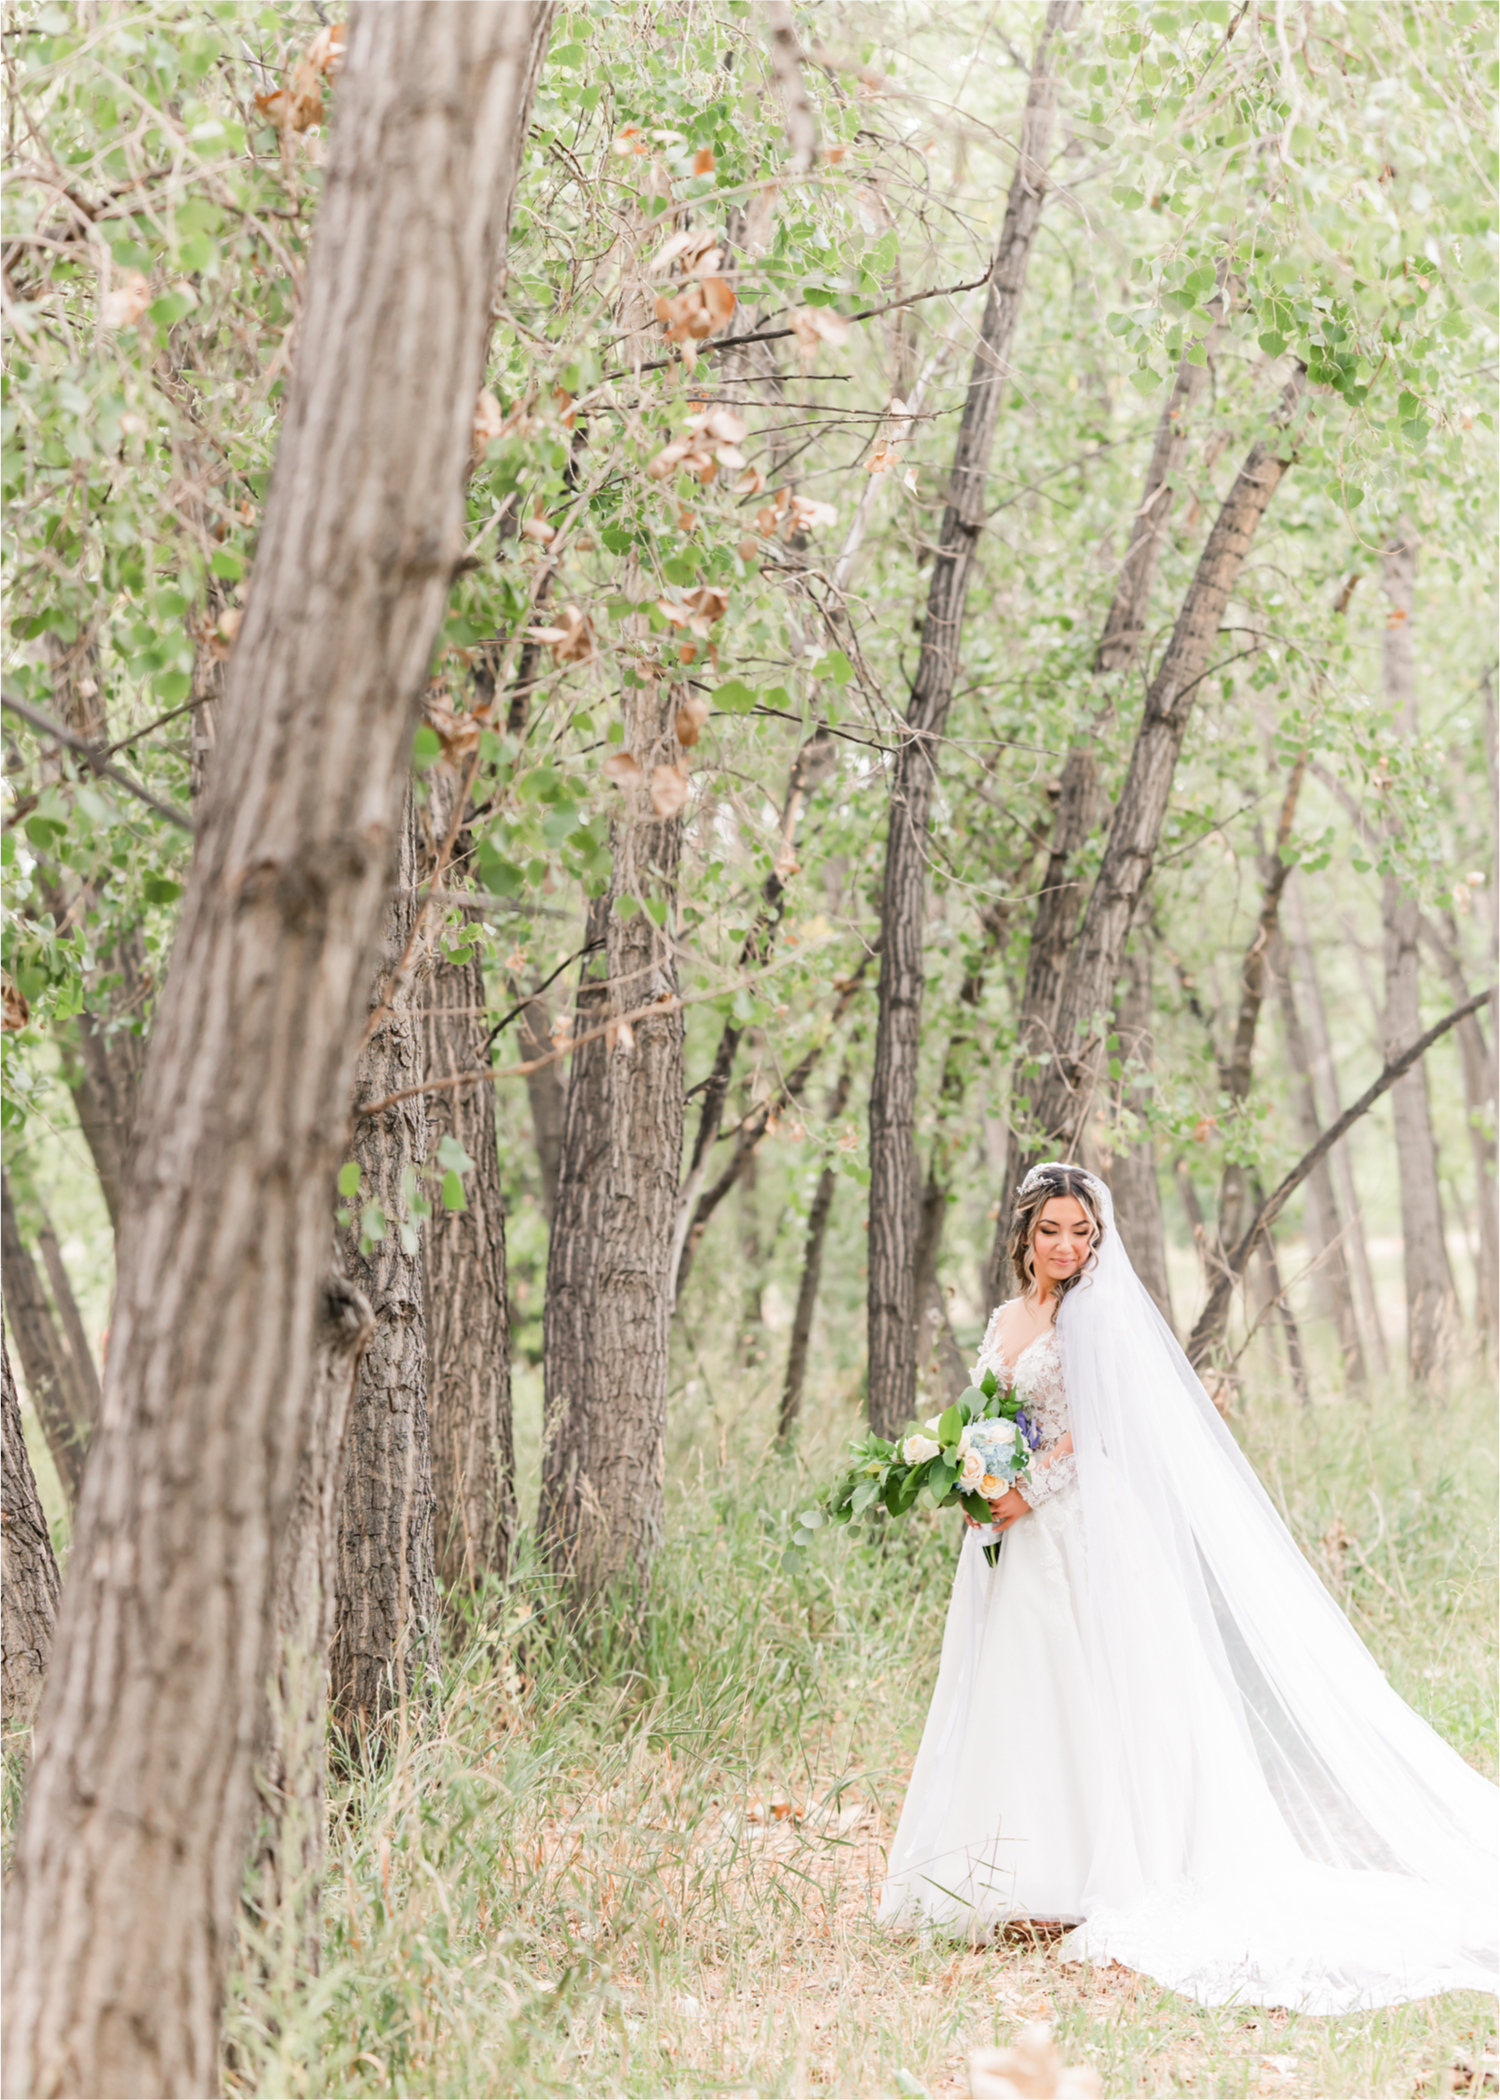 Romantic and Rustic Wedding at The Mill in Windsor | Britni Girard Photography | Colorado based wedding photography and videography team | Bride Portraits | Bride's Dress from Madeira Wedding in Kiev Ukraine | Portraits at Eastman Park